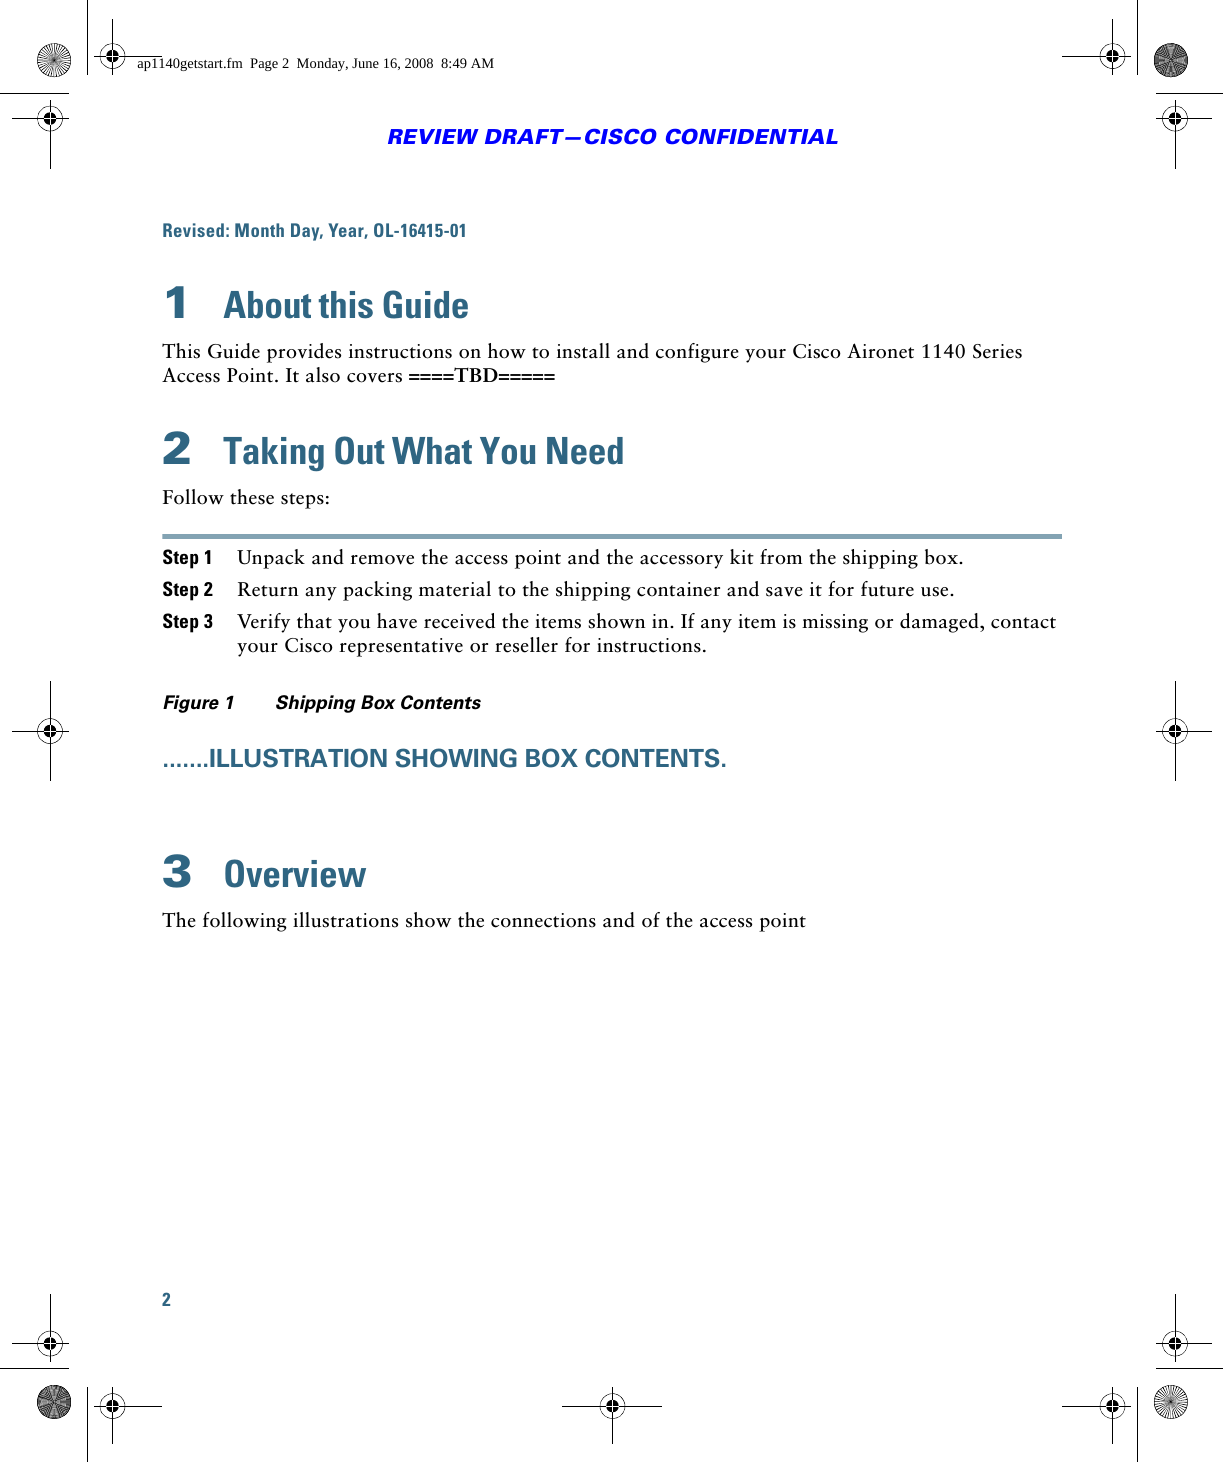 2REVIEW DRAFT—CISCO CONFIDENTIALRevised: Month Day, Year, OL-16415-011  About this GuideThis Guide provides instructions on how to install and configure your Cisco Aironet 1140 Series Access Point. It also covers ====TBD=====2  Taking Out What You NeedFollow these steps:Step 1 Unpack and remove the access point and the accessory kit from the shipping box.Step 2 Return any packing material to the shipping container and save it for future use.Step 3 Verify that you have received the items shown in. If any item is missing or damaged, contact your Cisco representative or reseller for instructions.Figure 1 Shipping Box Contents.......ILLUSTRATION SHOWING BOX CONTENTS.3  OverviewThe following illustrations show the connections and of the access pointap1140getstart.fm  Page 2  Monday, June 16, 2008  8:49 AM